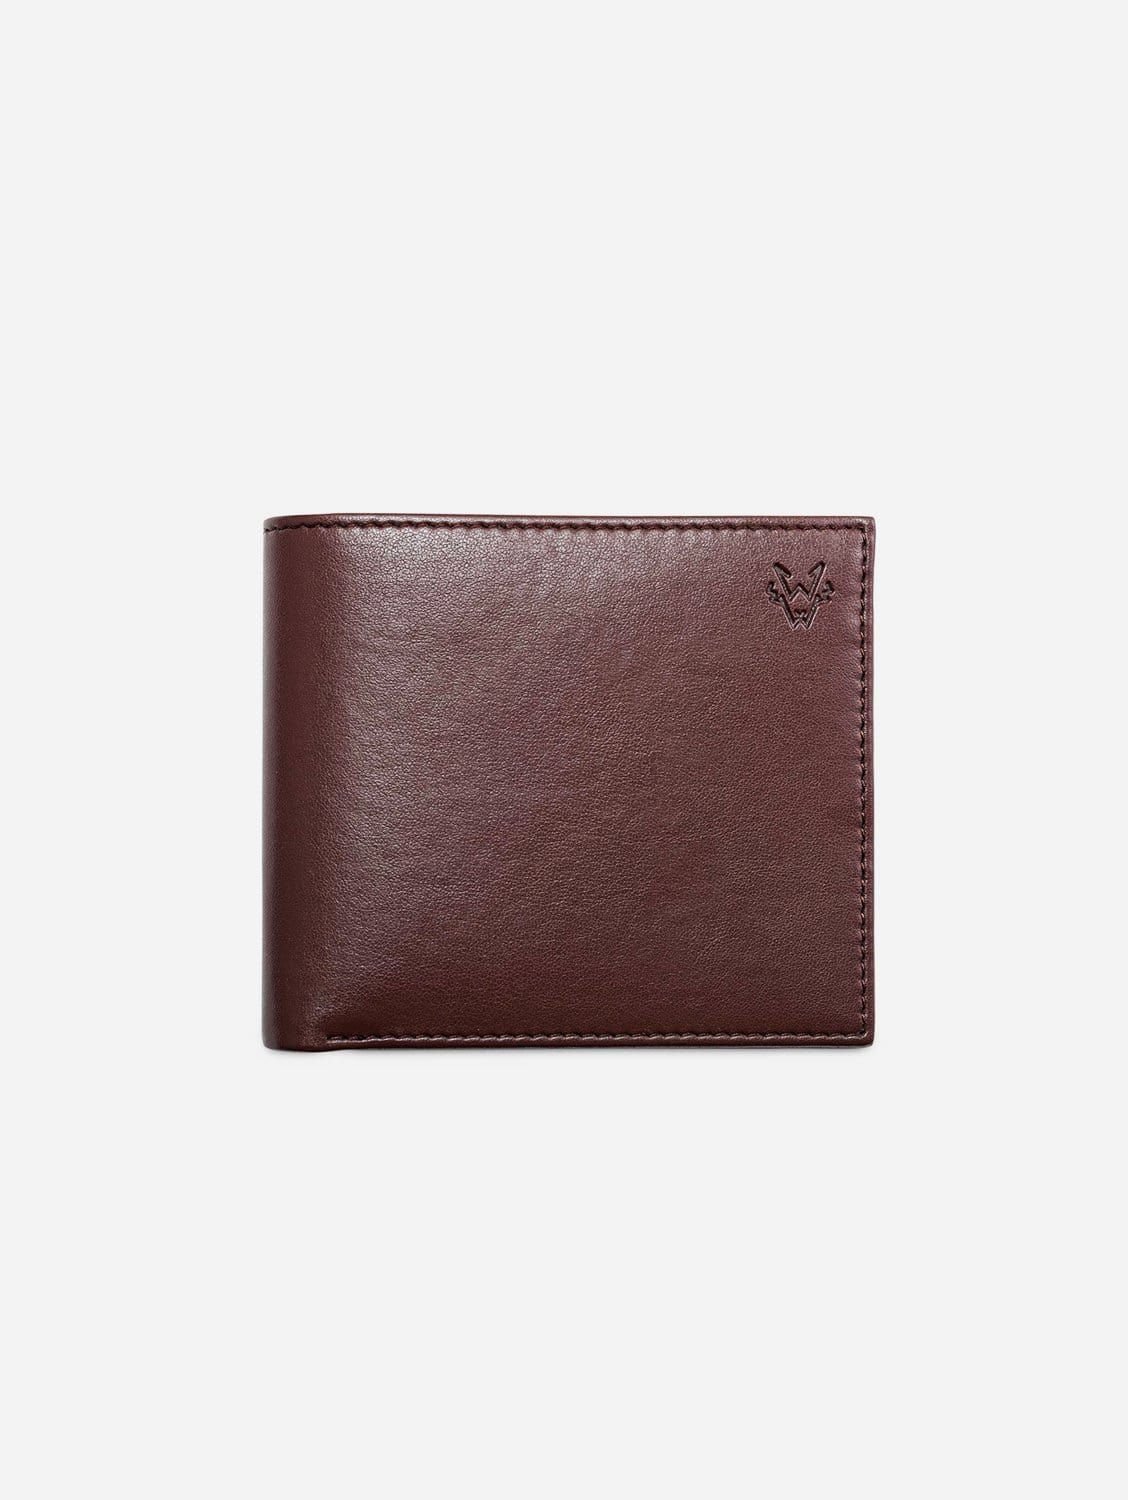 Watson & Wolfe - Vegan Leather RFID Protective Wallet with Coin